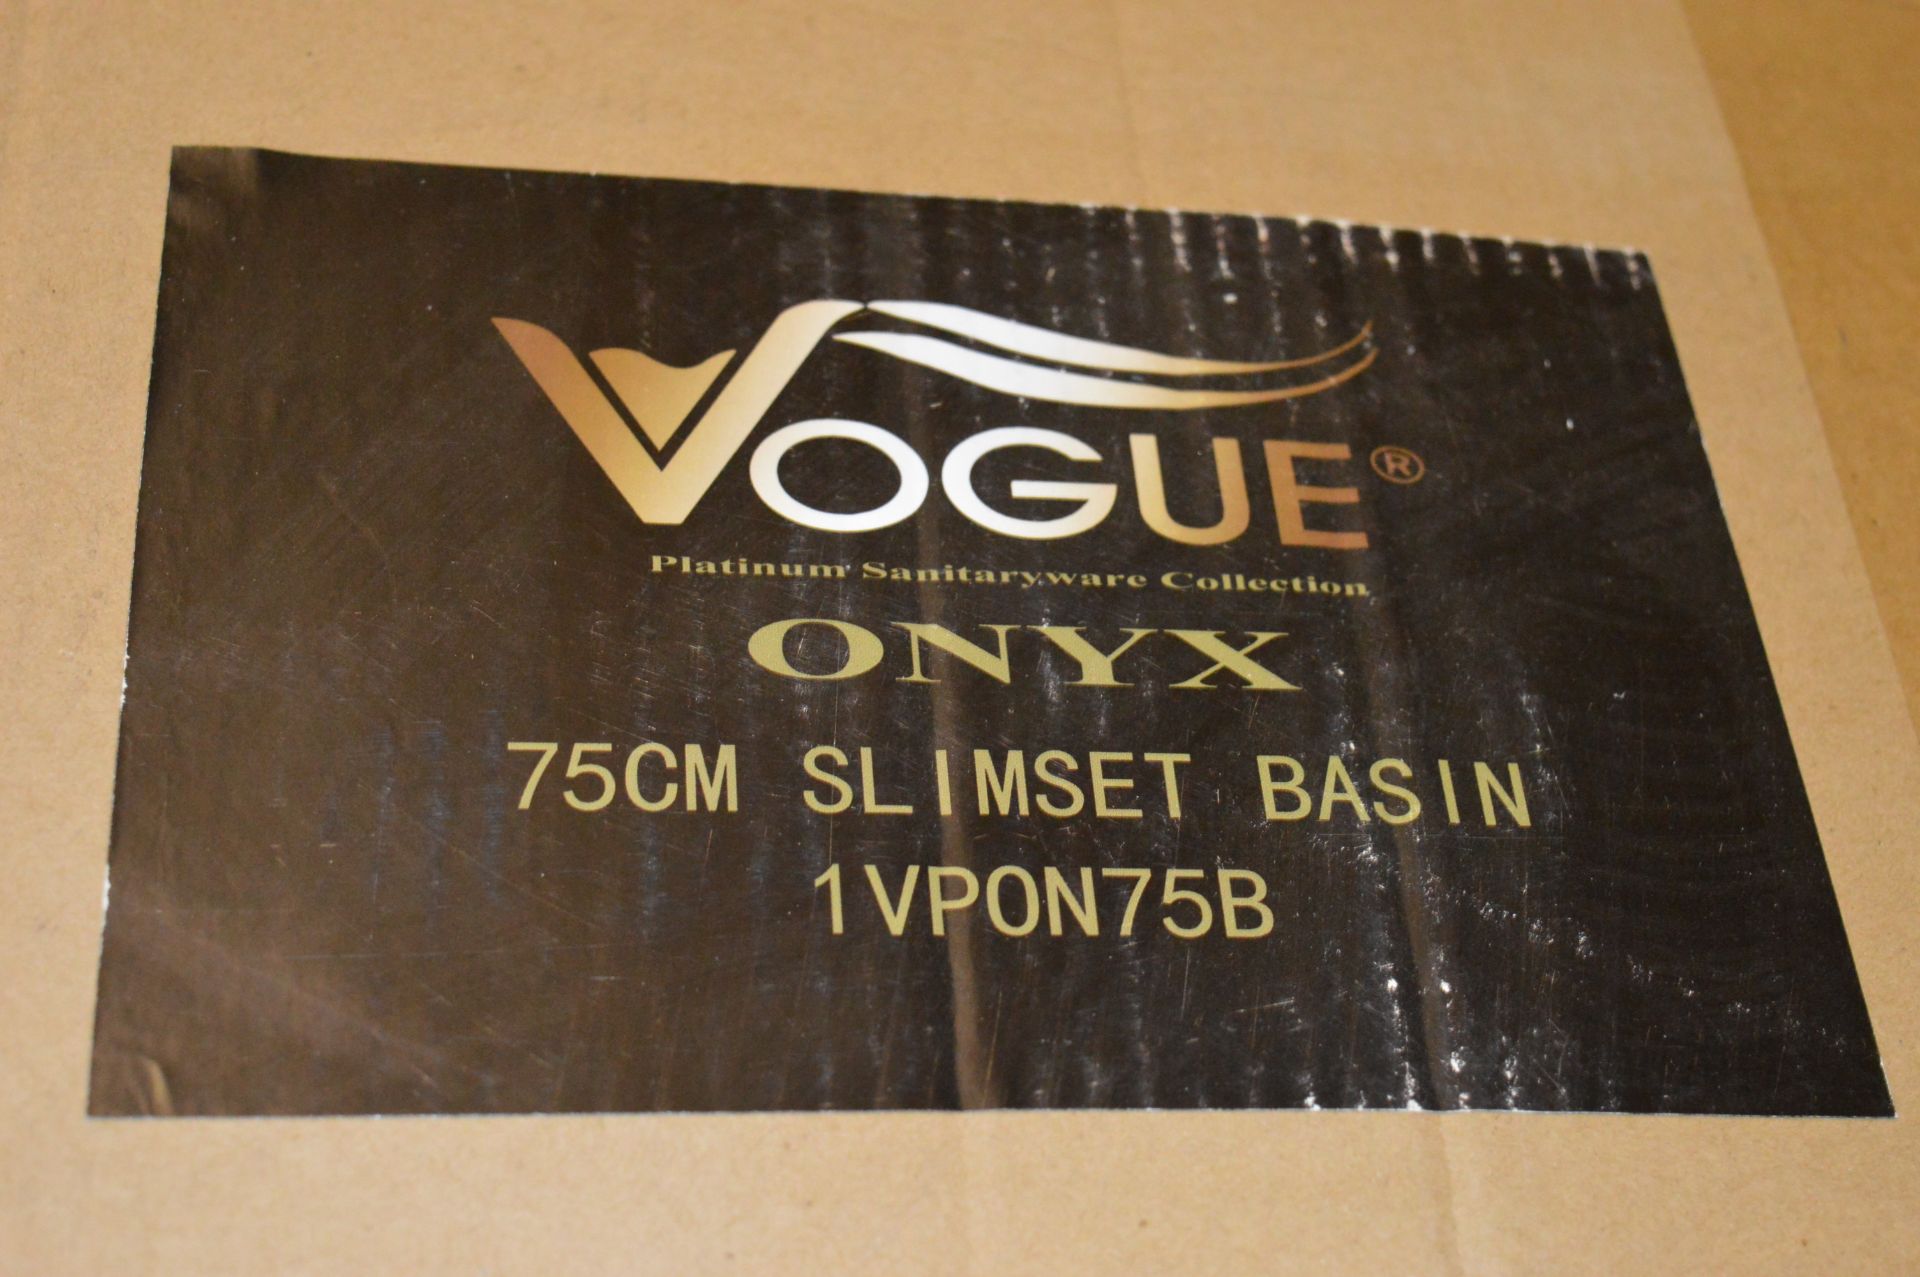 1 x Vogue Onyx White Gloss 600mm Bathroom Vanity Unit With Wash Basin - Vinyl Wrap Coating for - Image 11 of 11